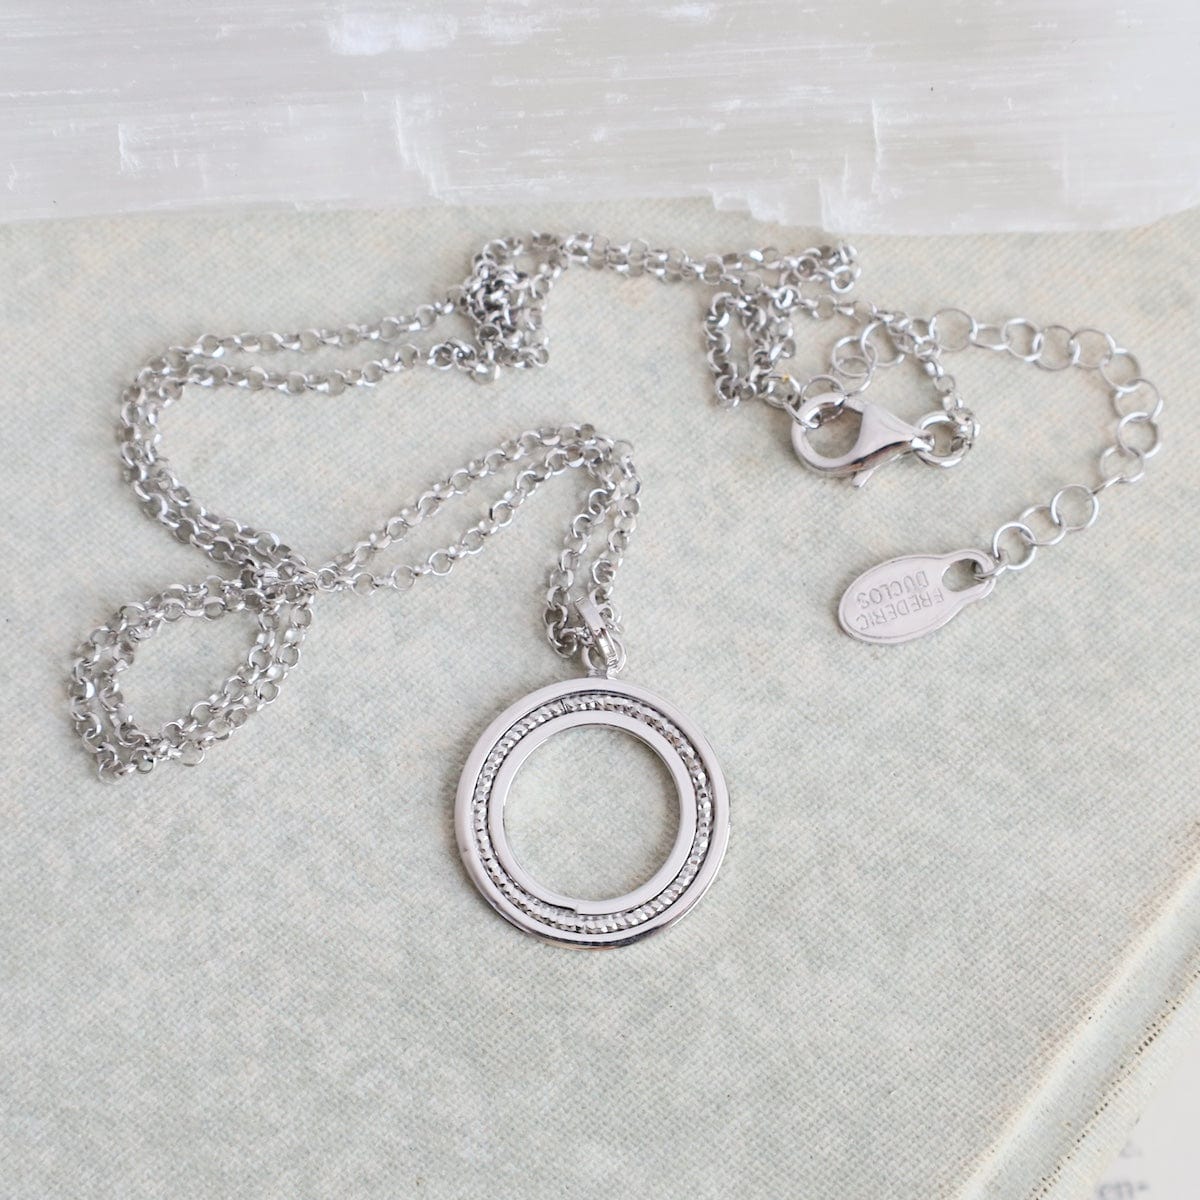 NKL Sterling Silver Canon Necklace